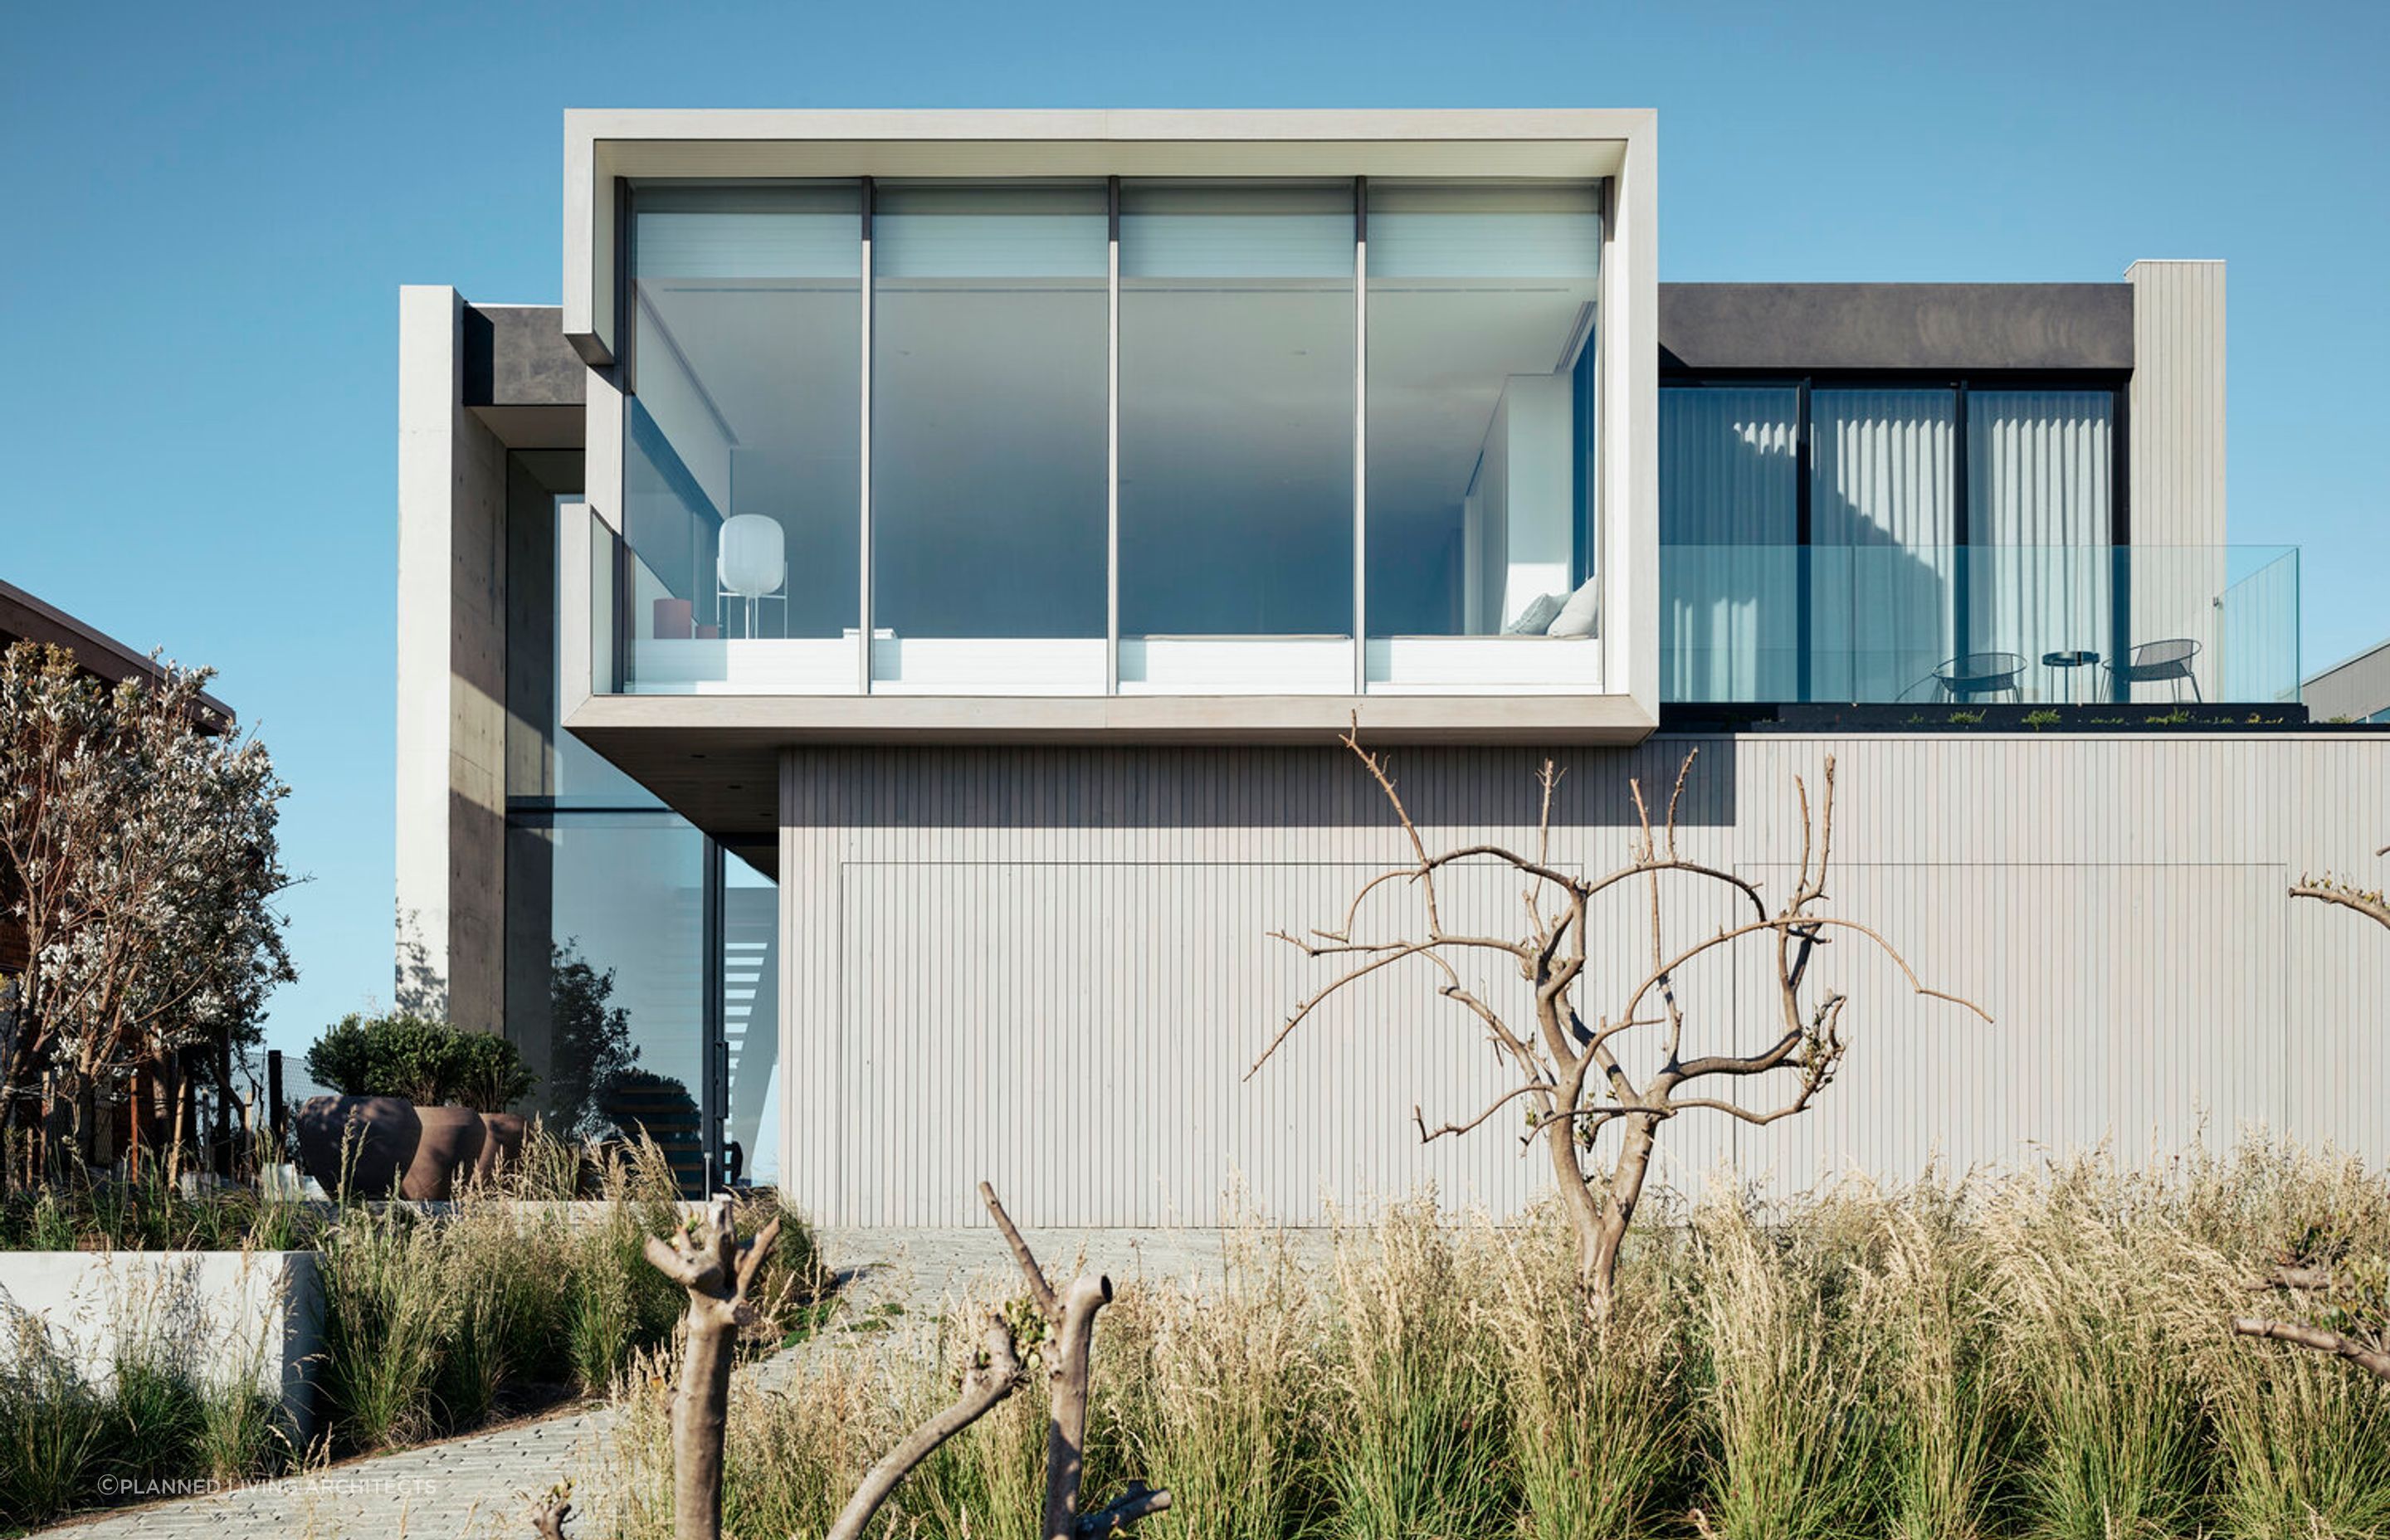 Blairgowrie Ocean Beach House's timber cladding exterior subtly mirrors the shades of the surrounding grassland. Photography: Derek Swalwell.